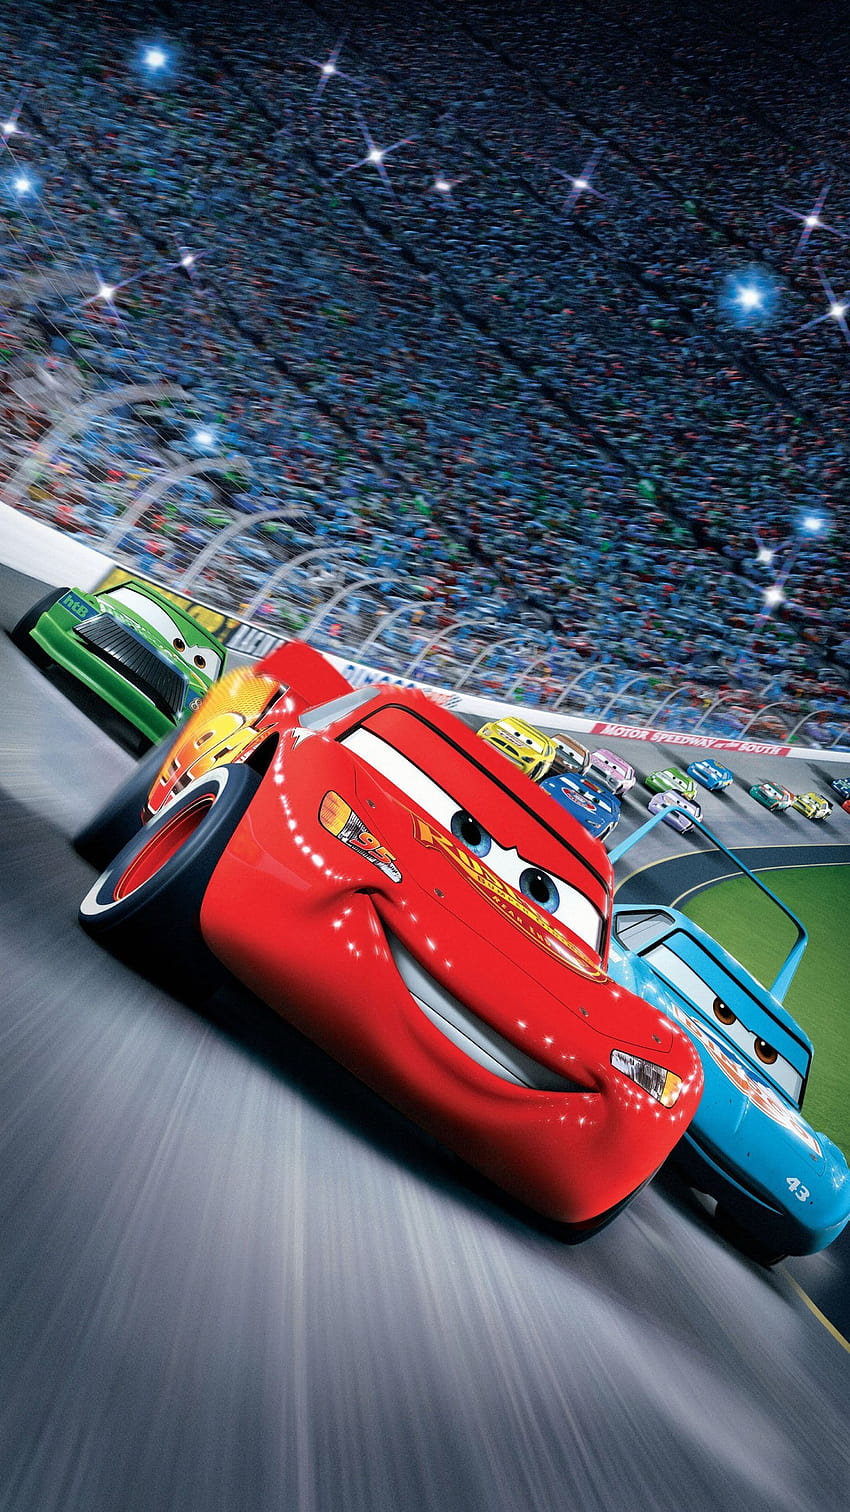 Cars 3 Red Lightning McQueen 4k movies wallpapers hdwallpapers cars 3  wallpapers 4kwallpapers  Disney cars wallpaper Cars movie Lightning  mcqueen